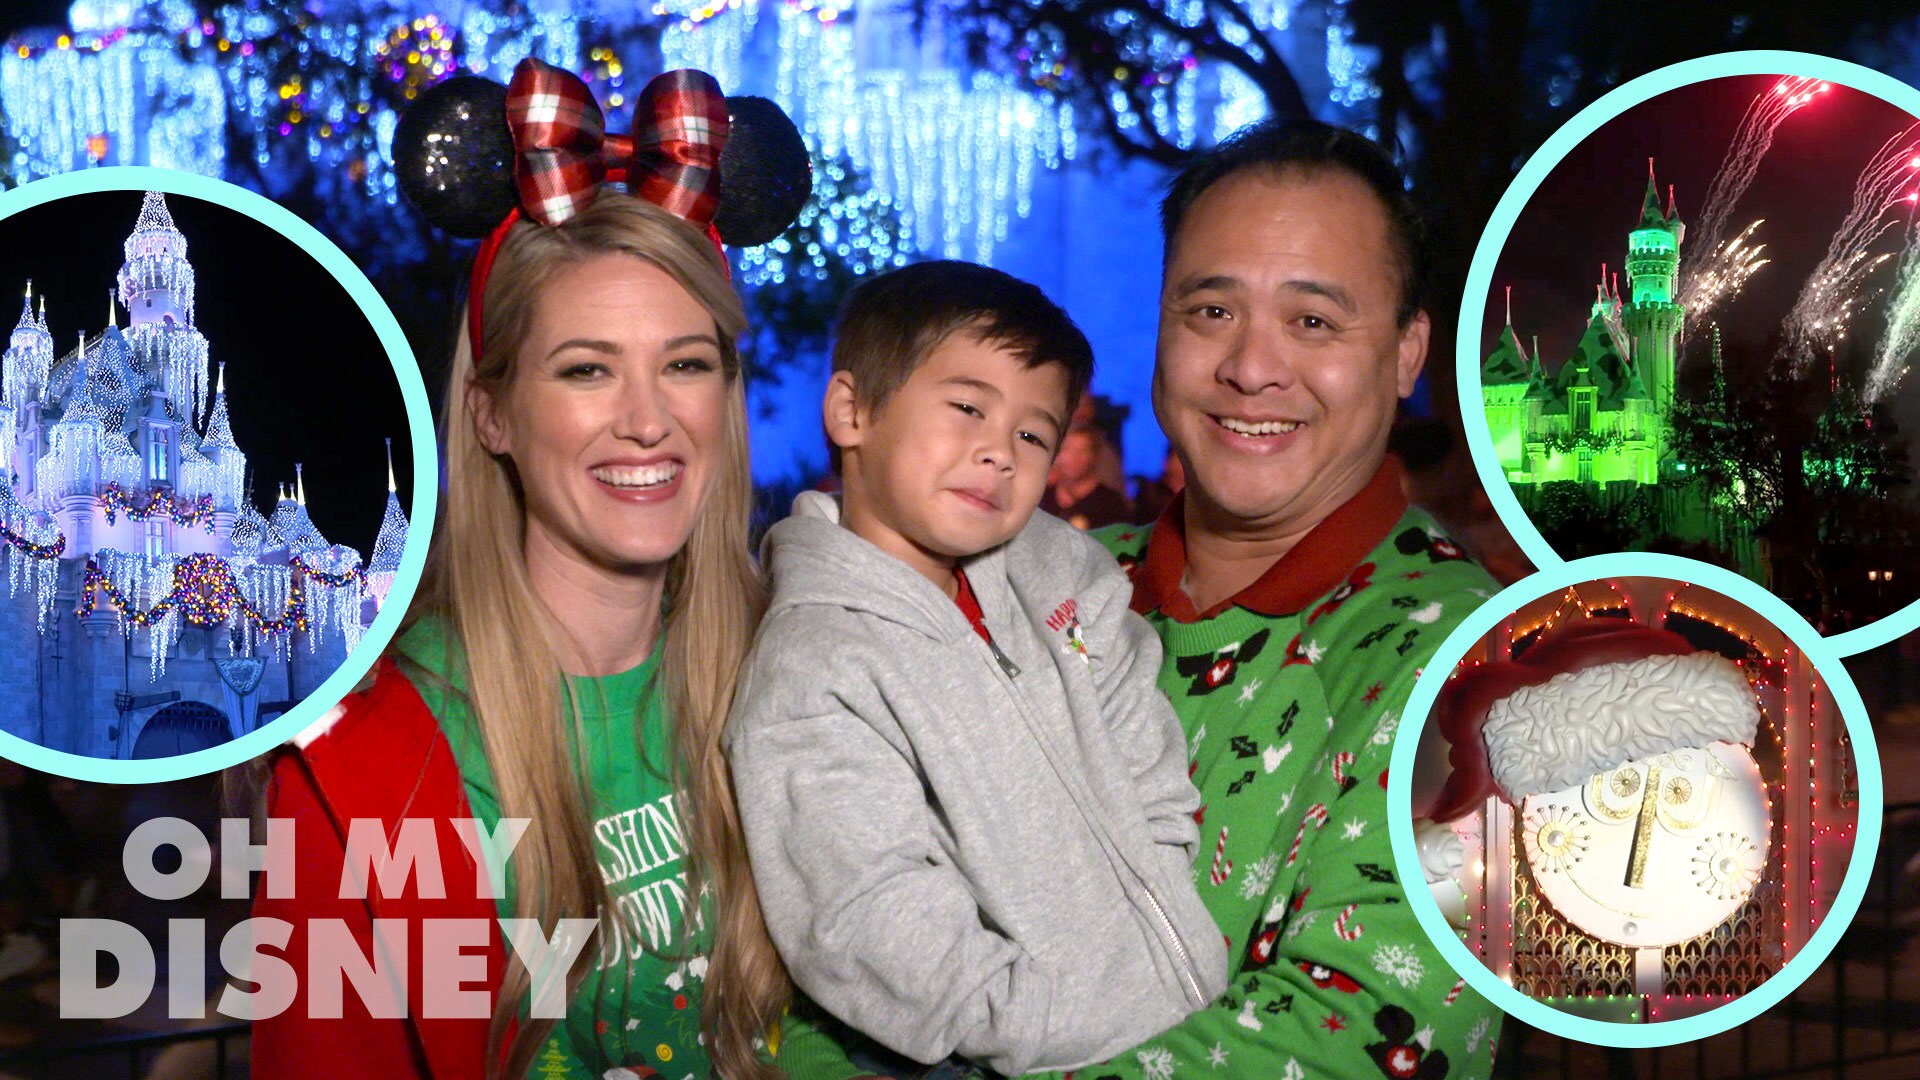 Inside the "Believe in Holiday Magic" Fireworks Spectacular at Disneyland | Oh My Disney